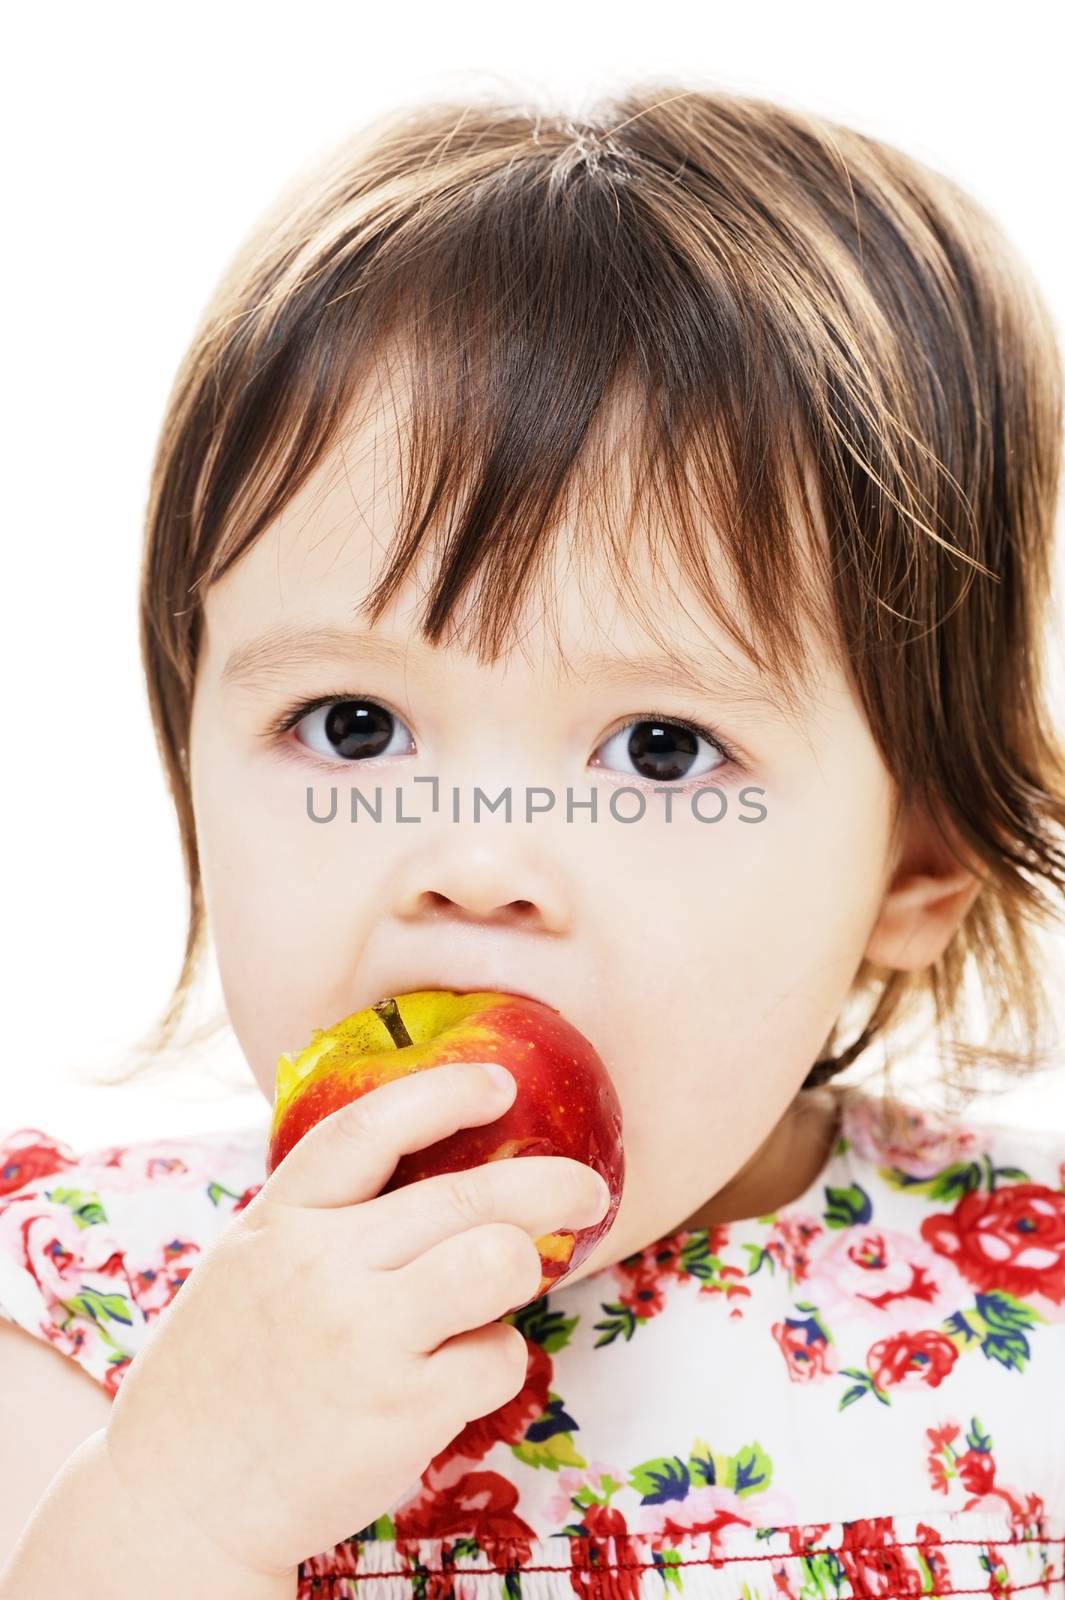 Young girl taking bite from big red apple